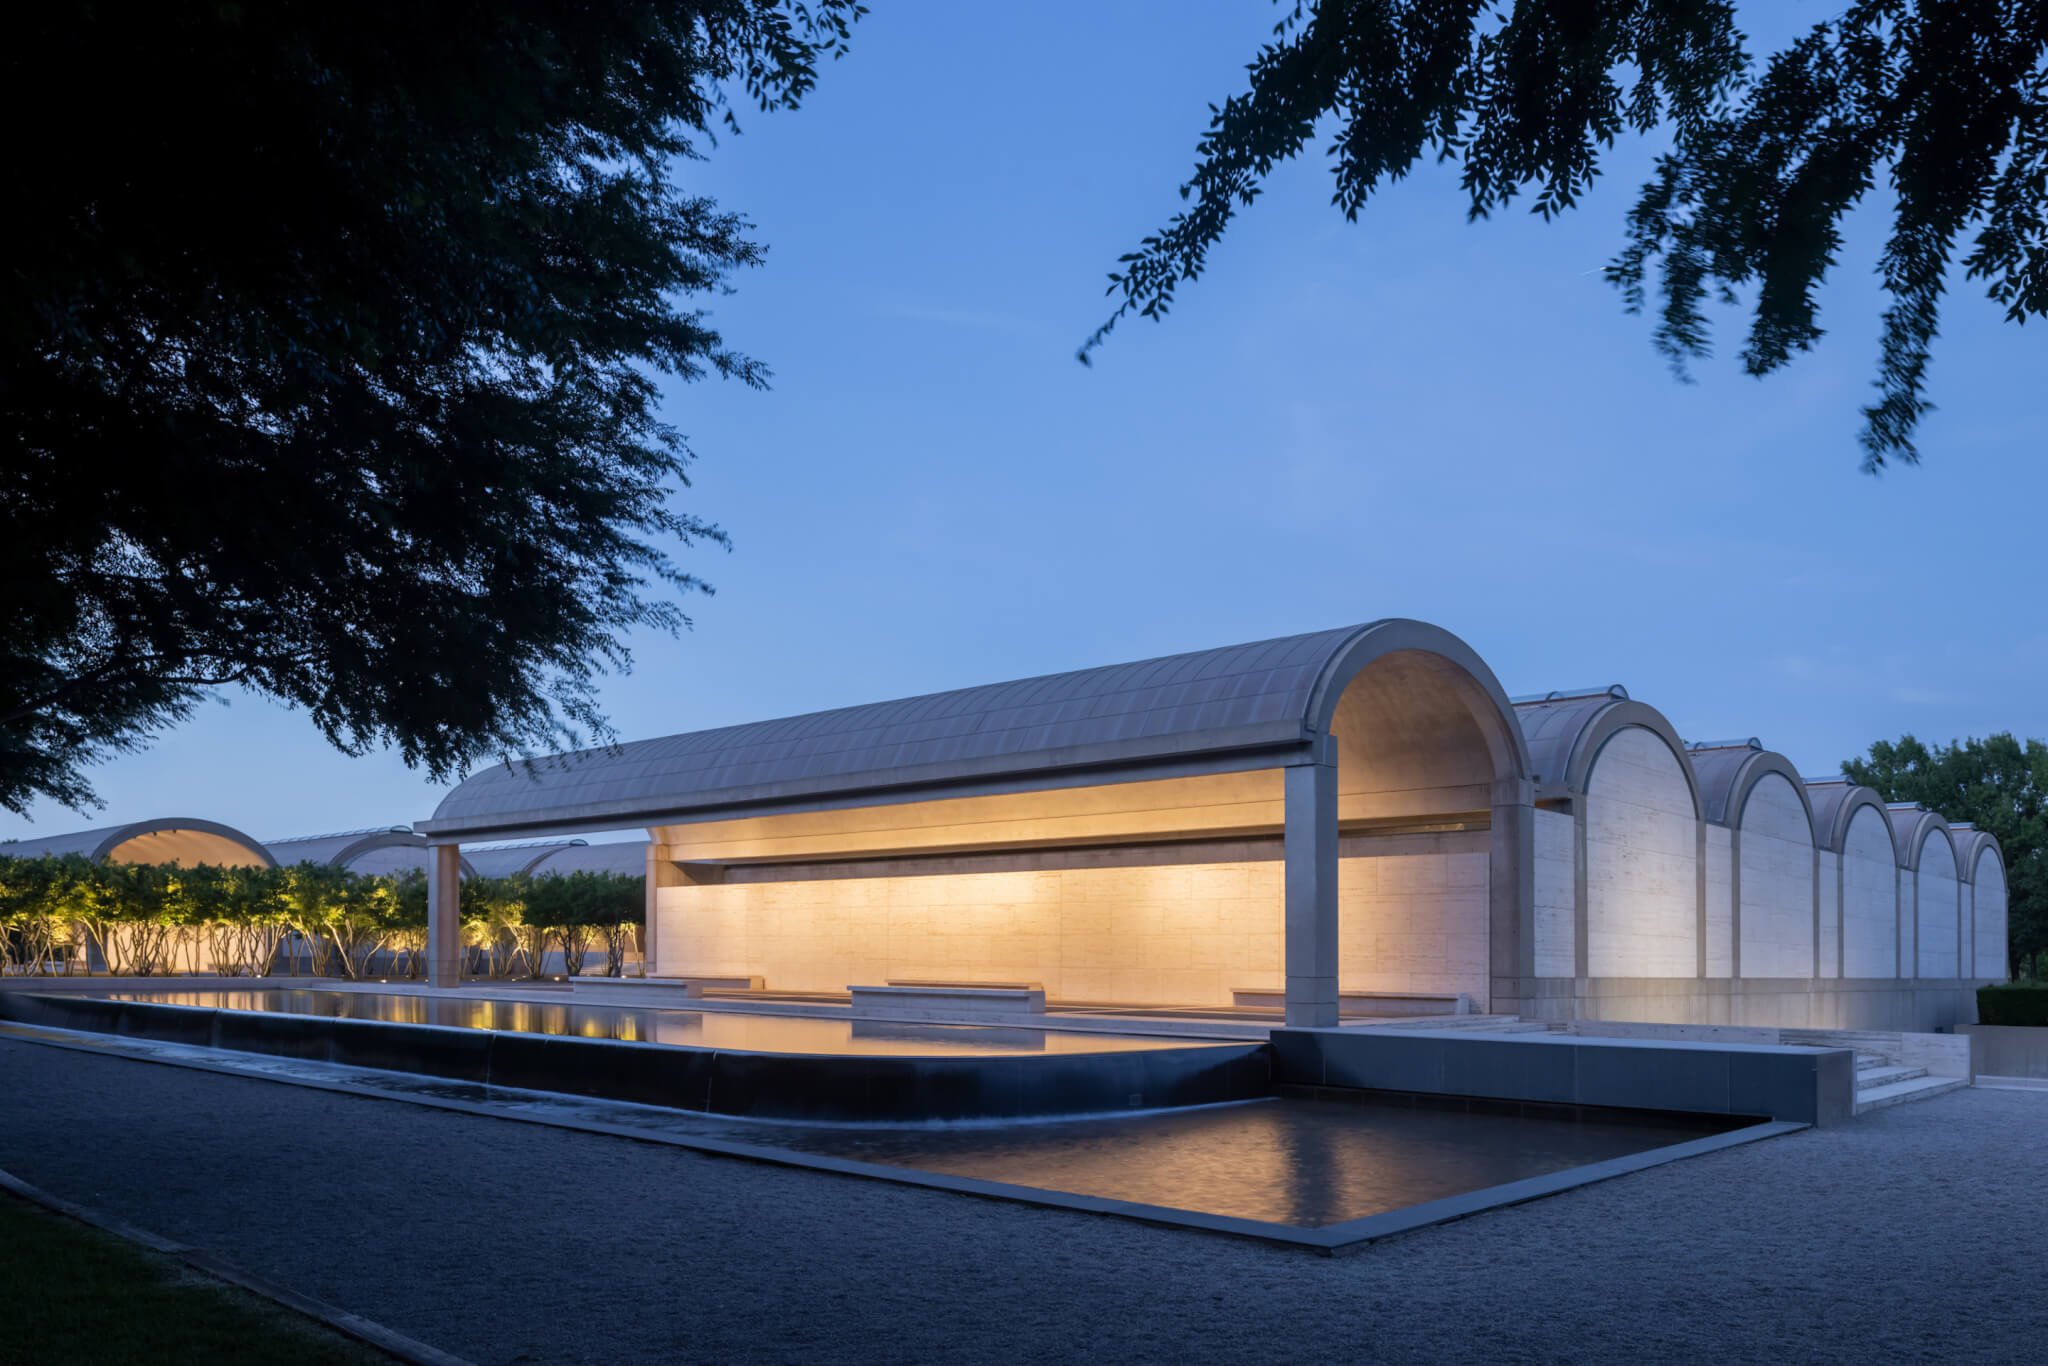 At 50, Louis Kahn’s Kimbell Art Museum in Fort Worth remains a paragon of architectural achievement